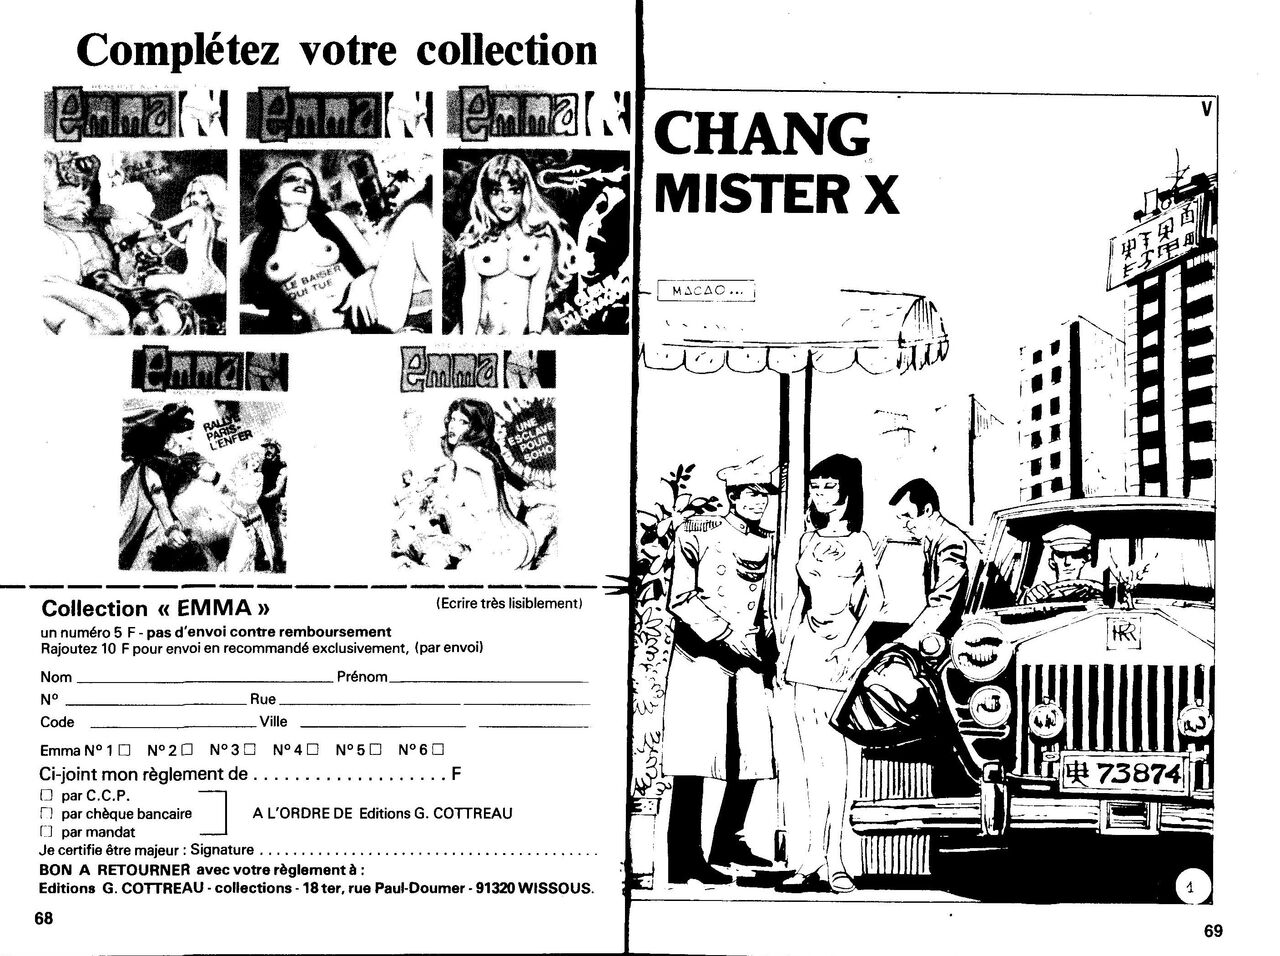 Hypersexy 14 - Lady Love : L’hypnotiseur + Chang : Mister X numero d'image 35